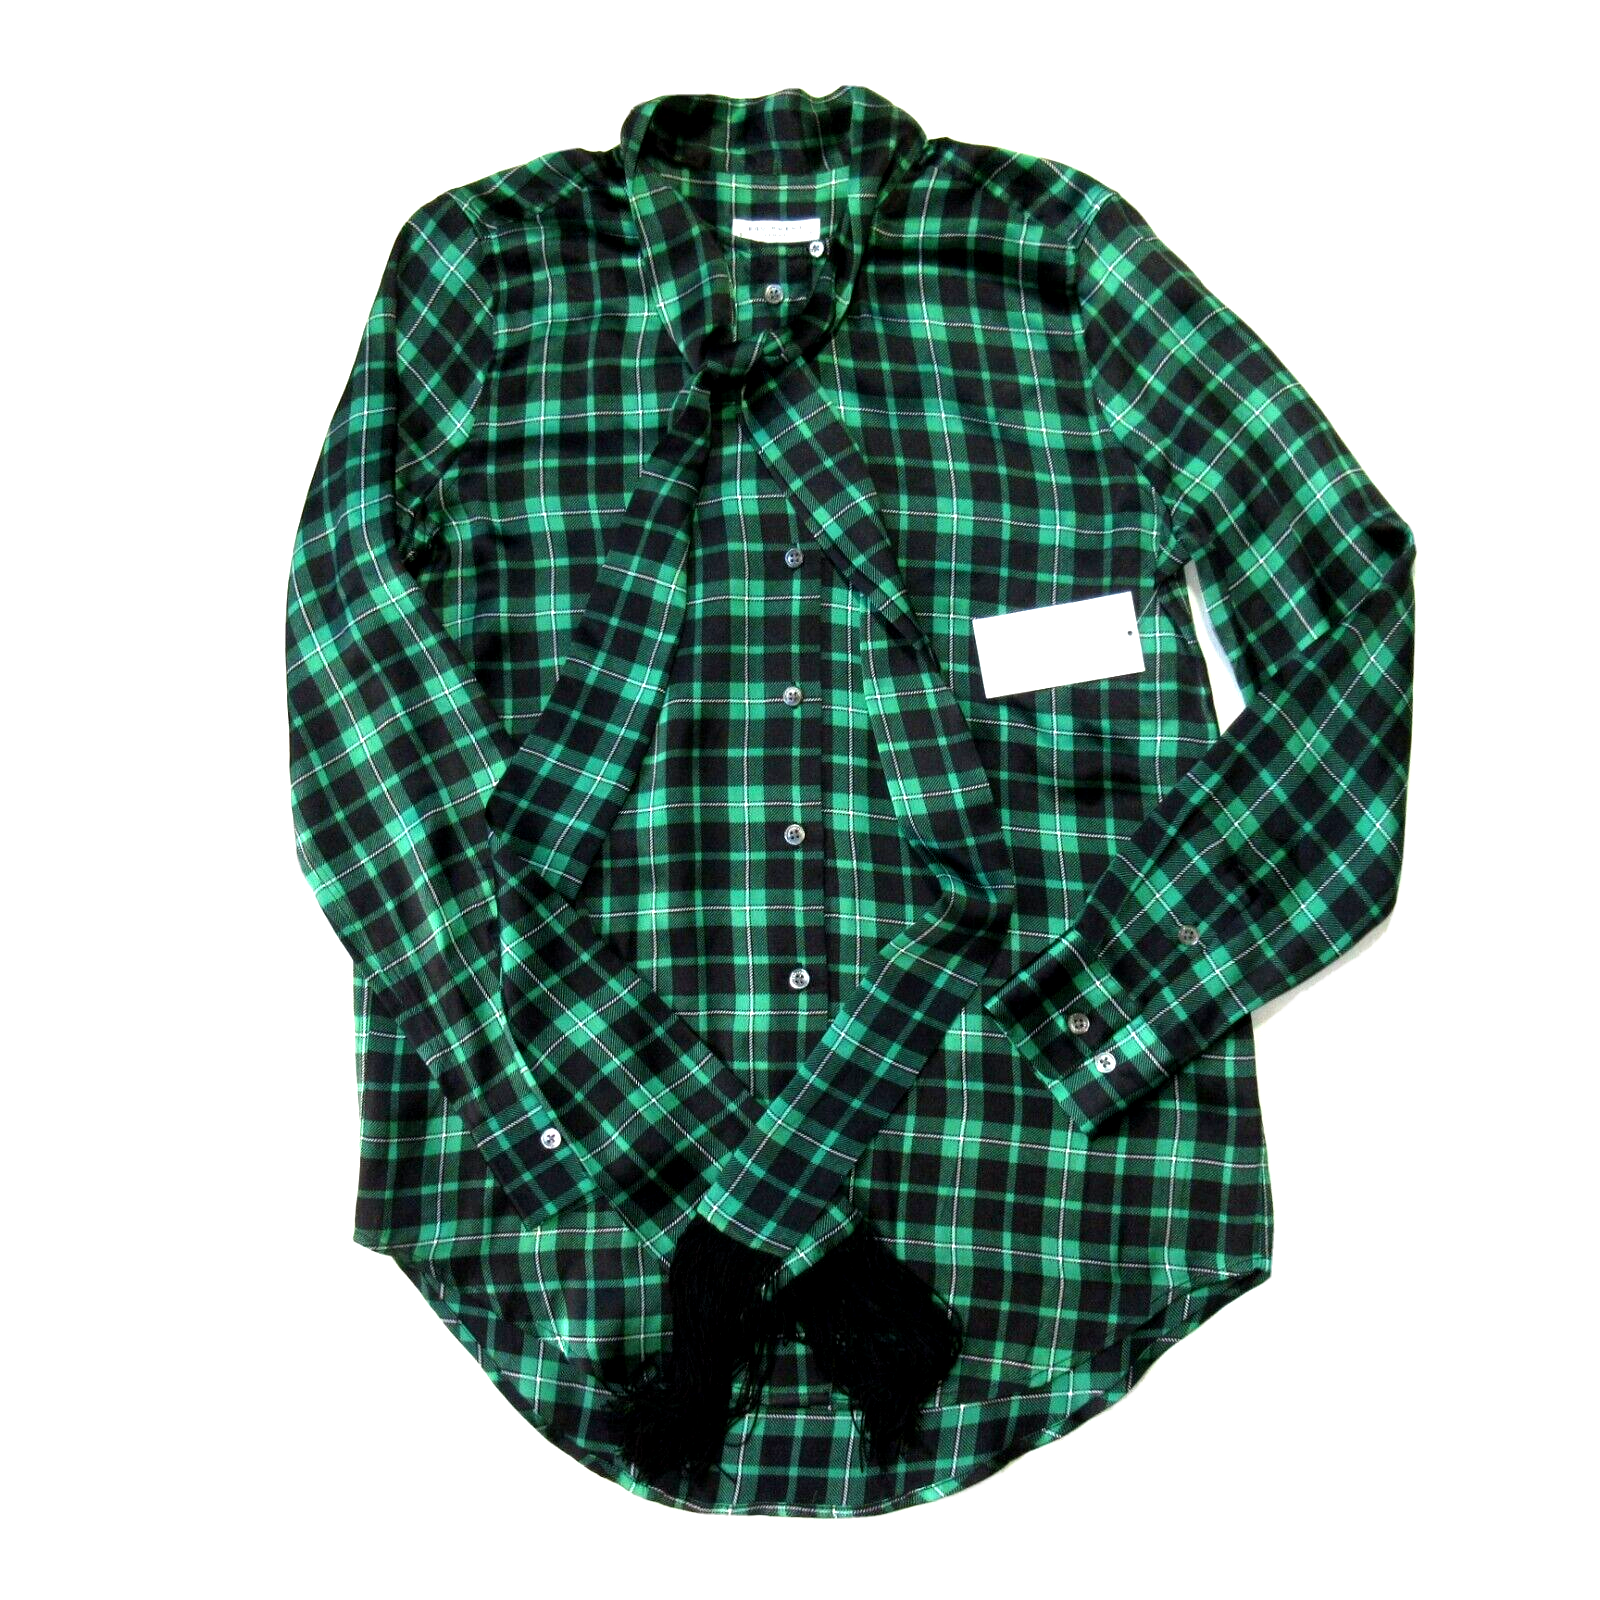 Primary image for NWT Equipment Essential Tie Neck in Emerald Envy Plaid Silk Button Down Shirt S